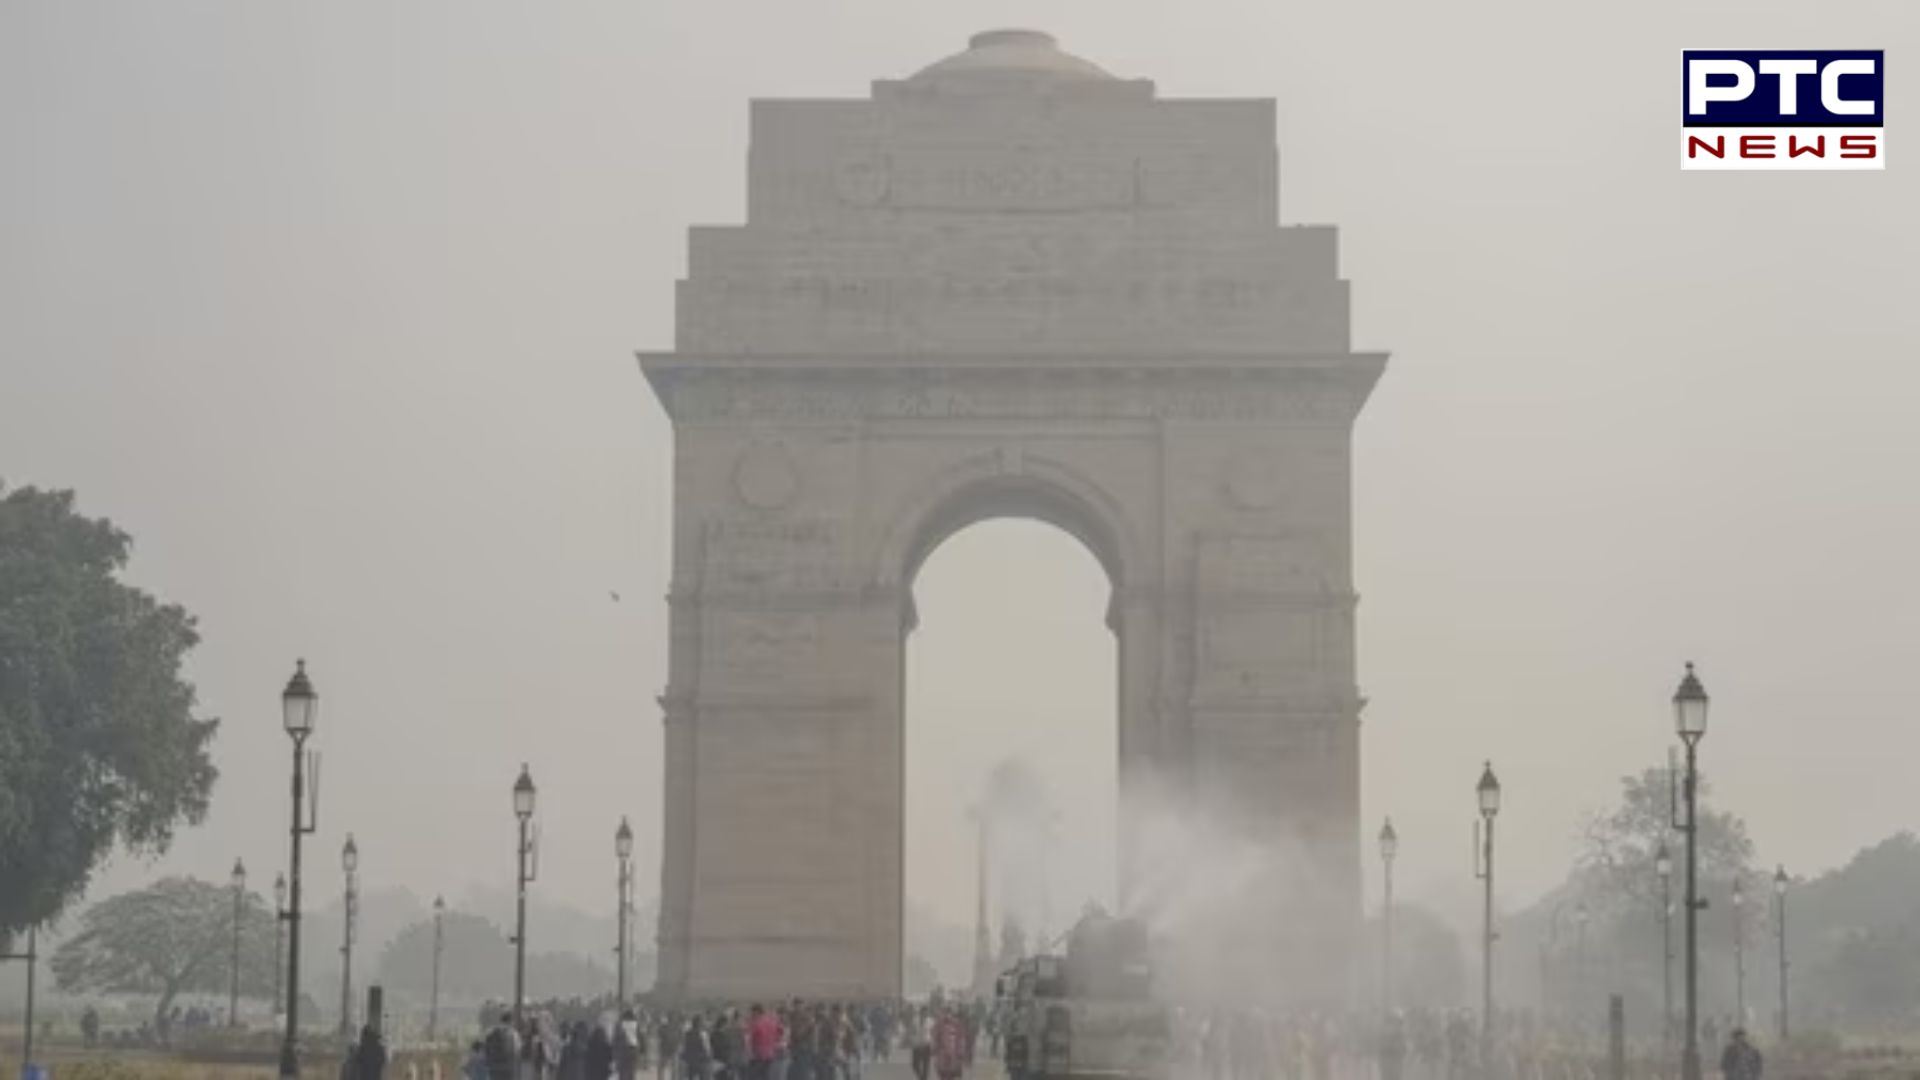 Delhi regains title as world's most polluted capital